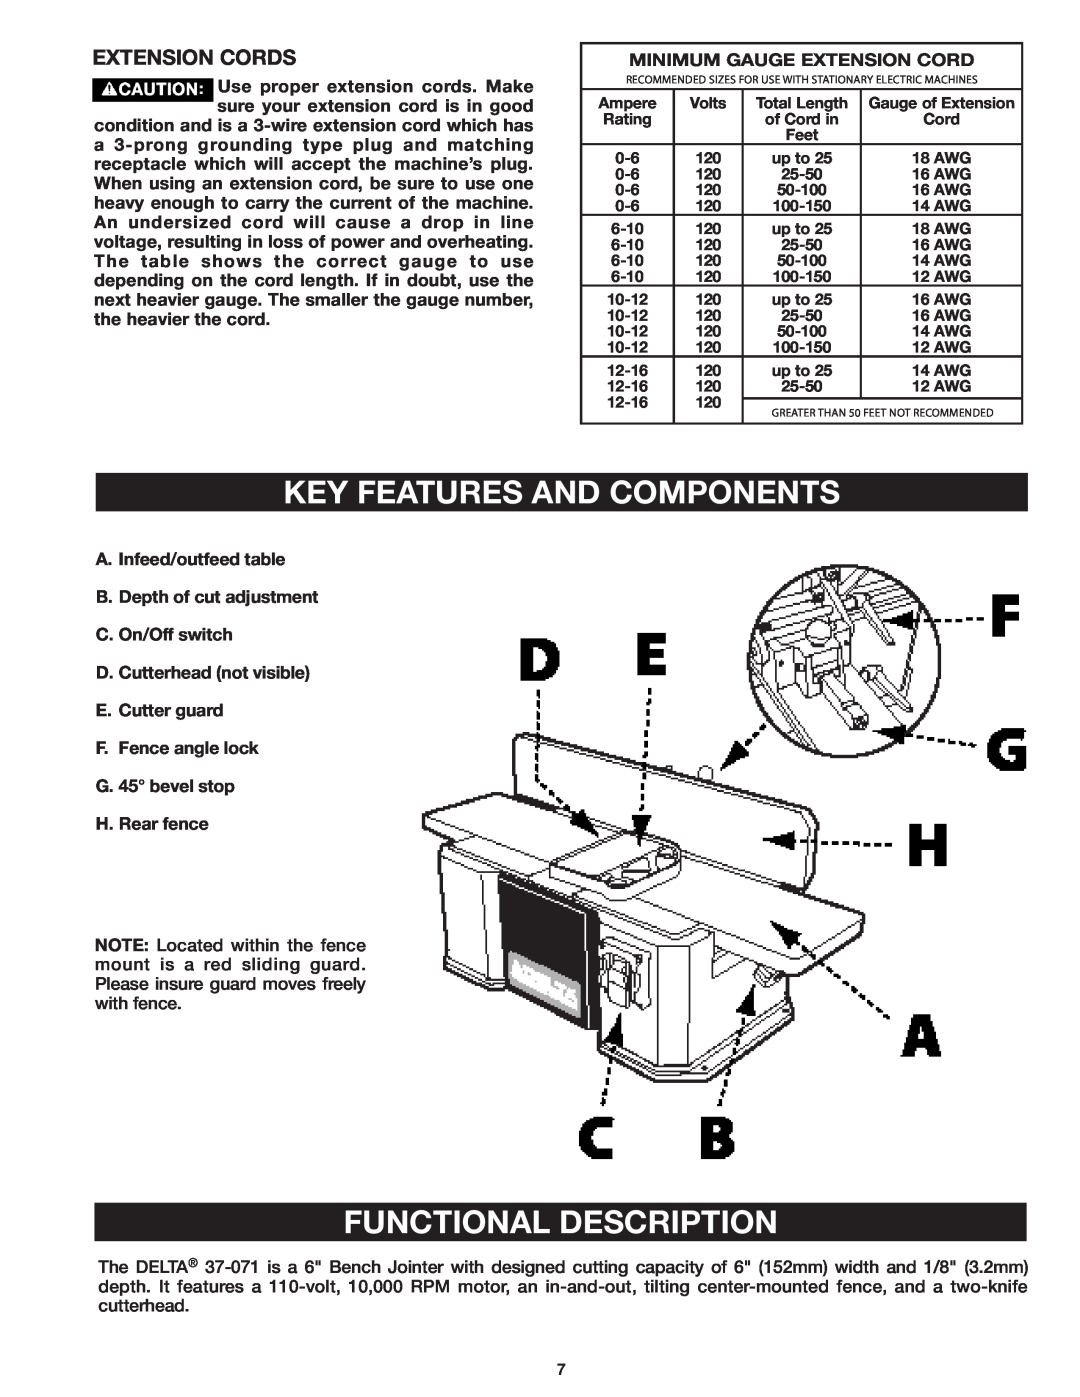 Delta 37-071 instruction manual Key Features And Components, Functional Description, Extension Cords 